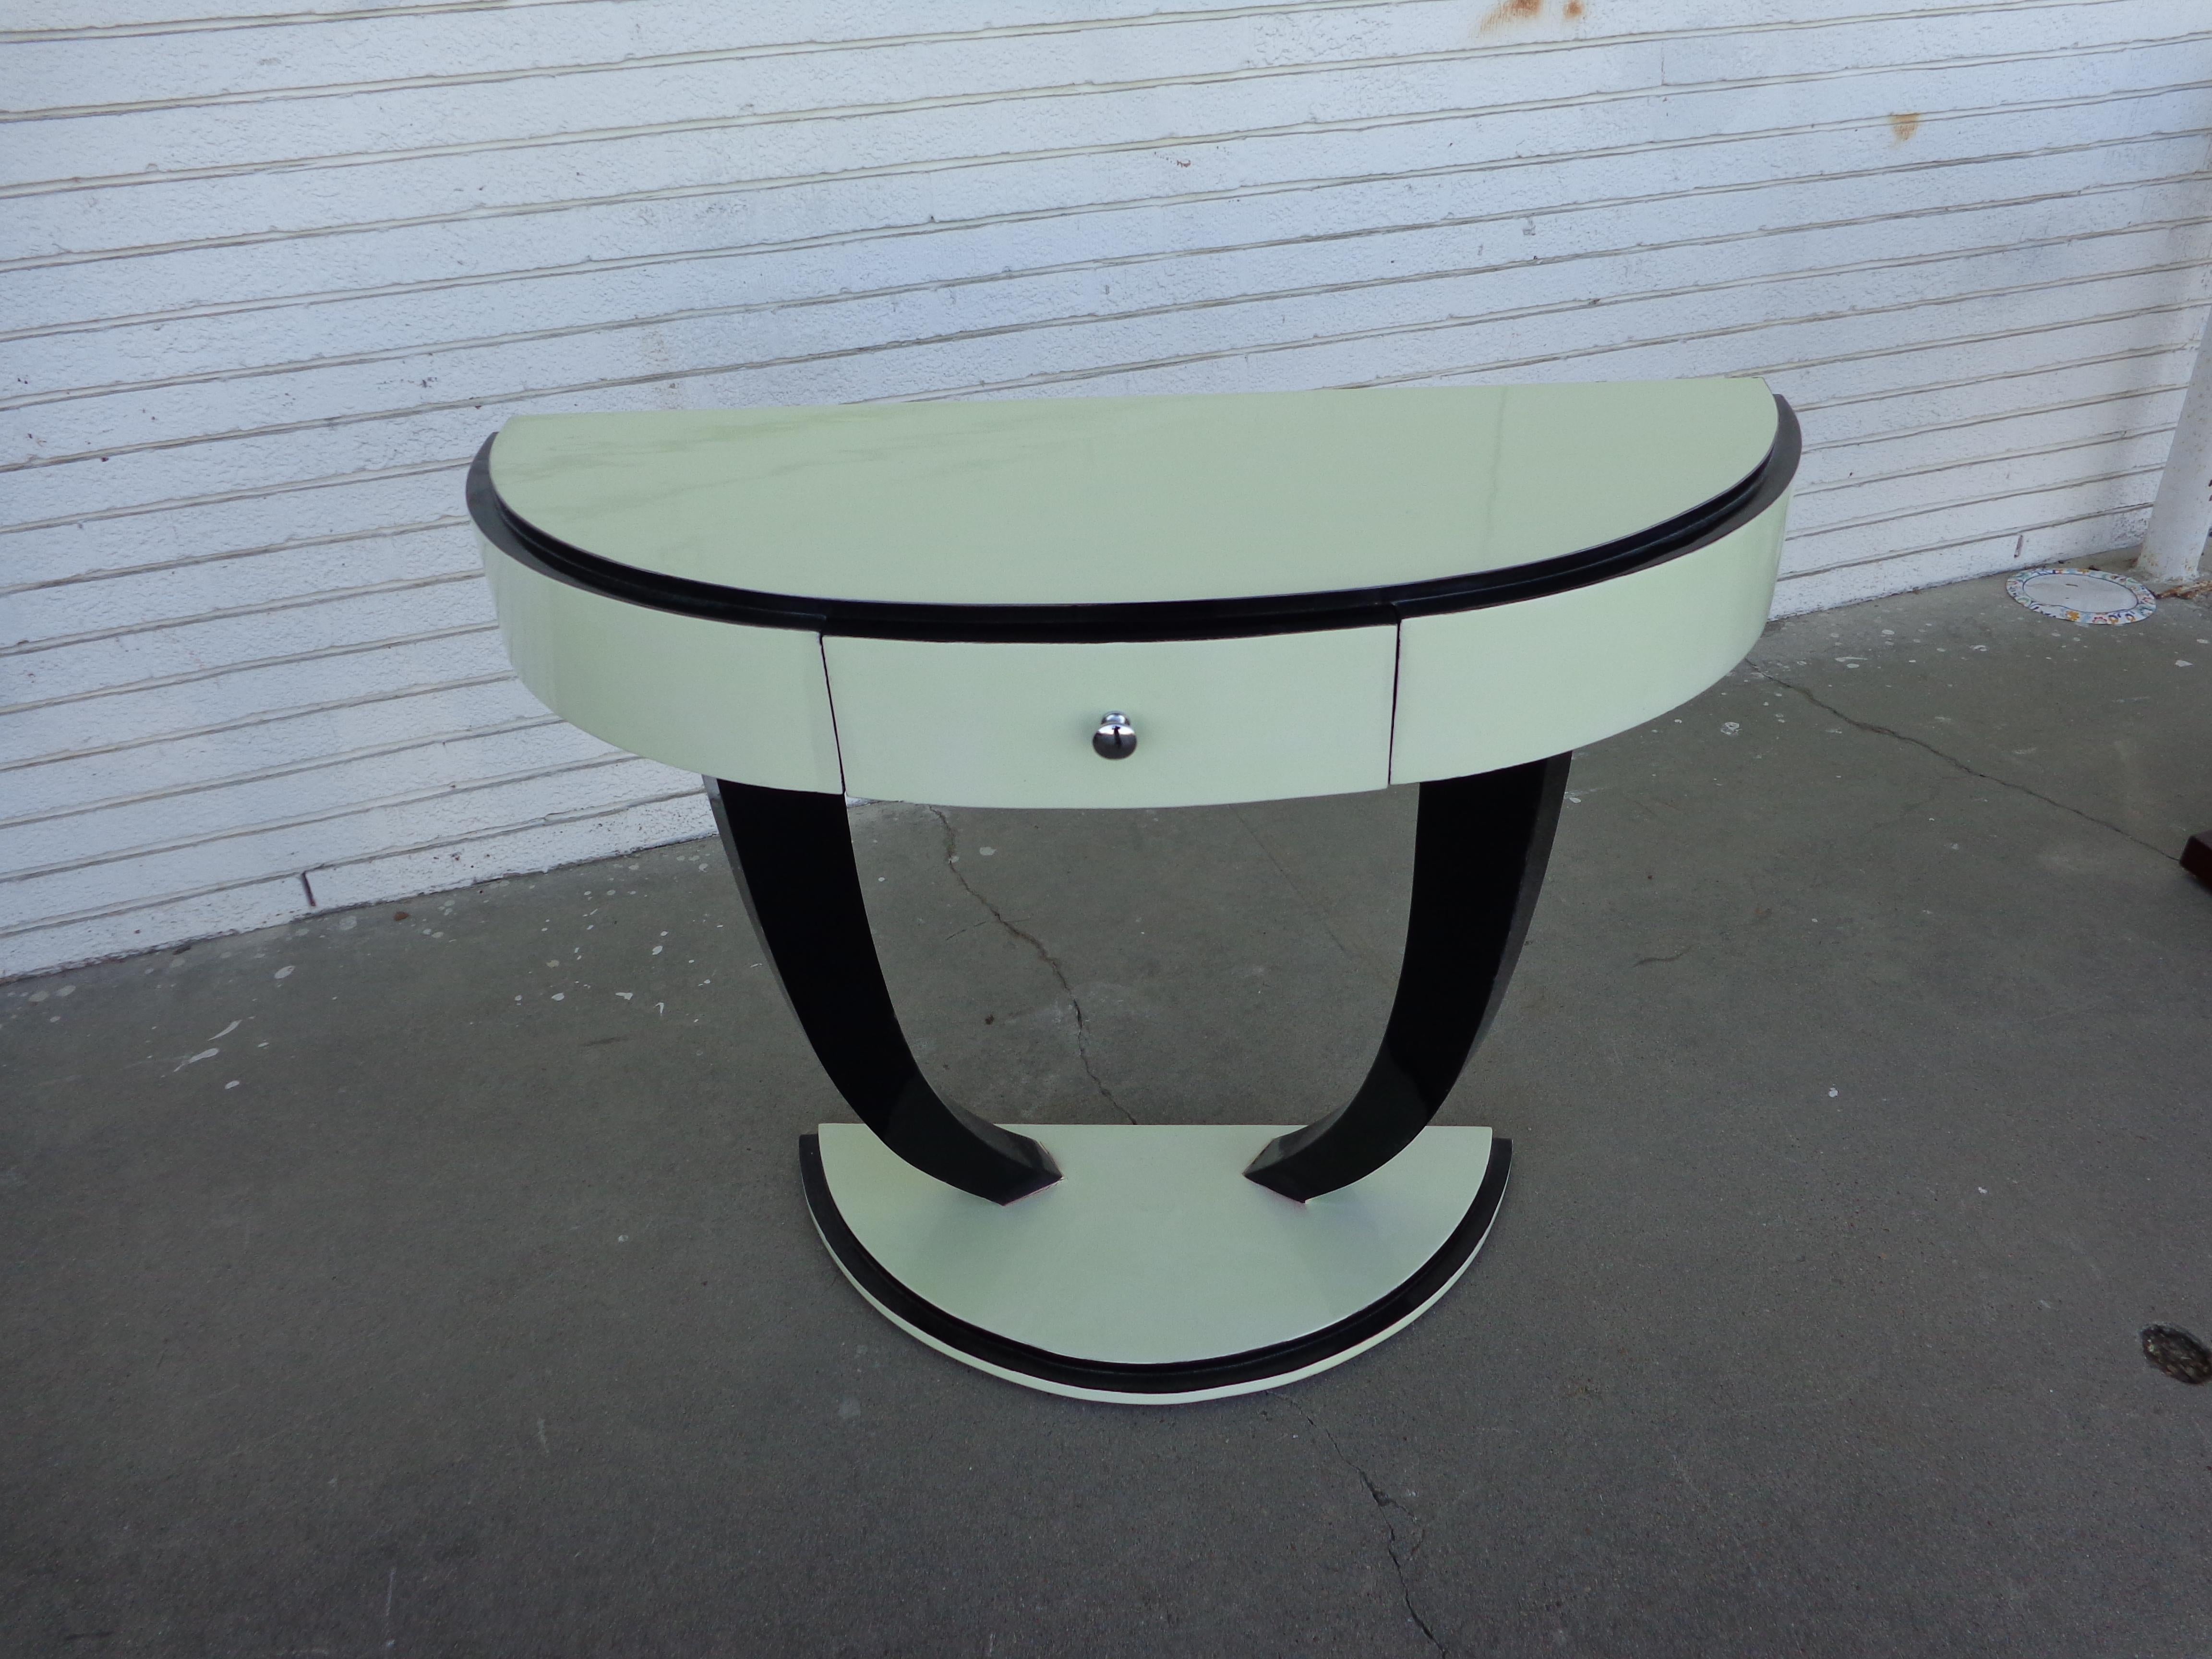 Art Deco style demilune console table

Petite pedestal console lacquered in off-white and black. One drawer with nickel pull.

